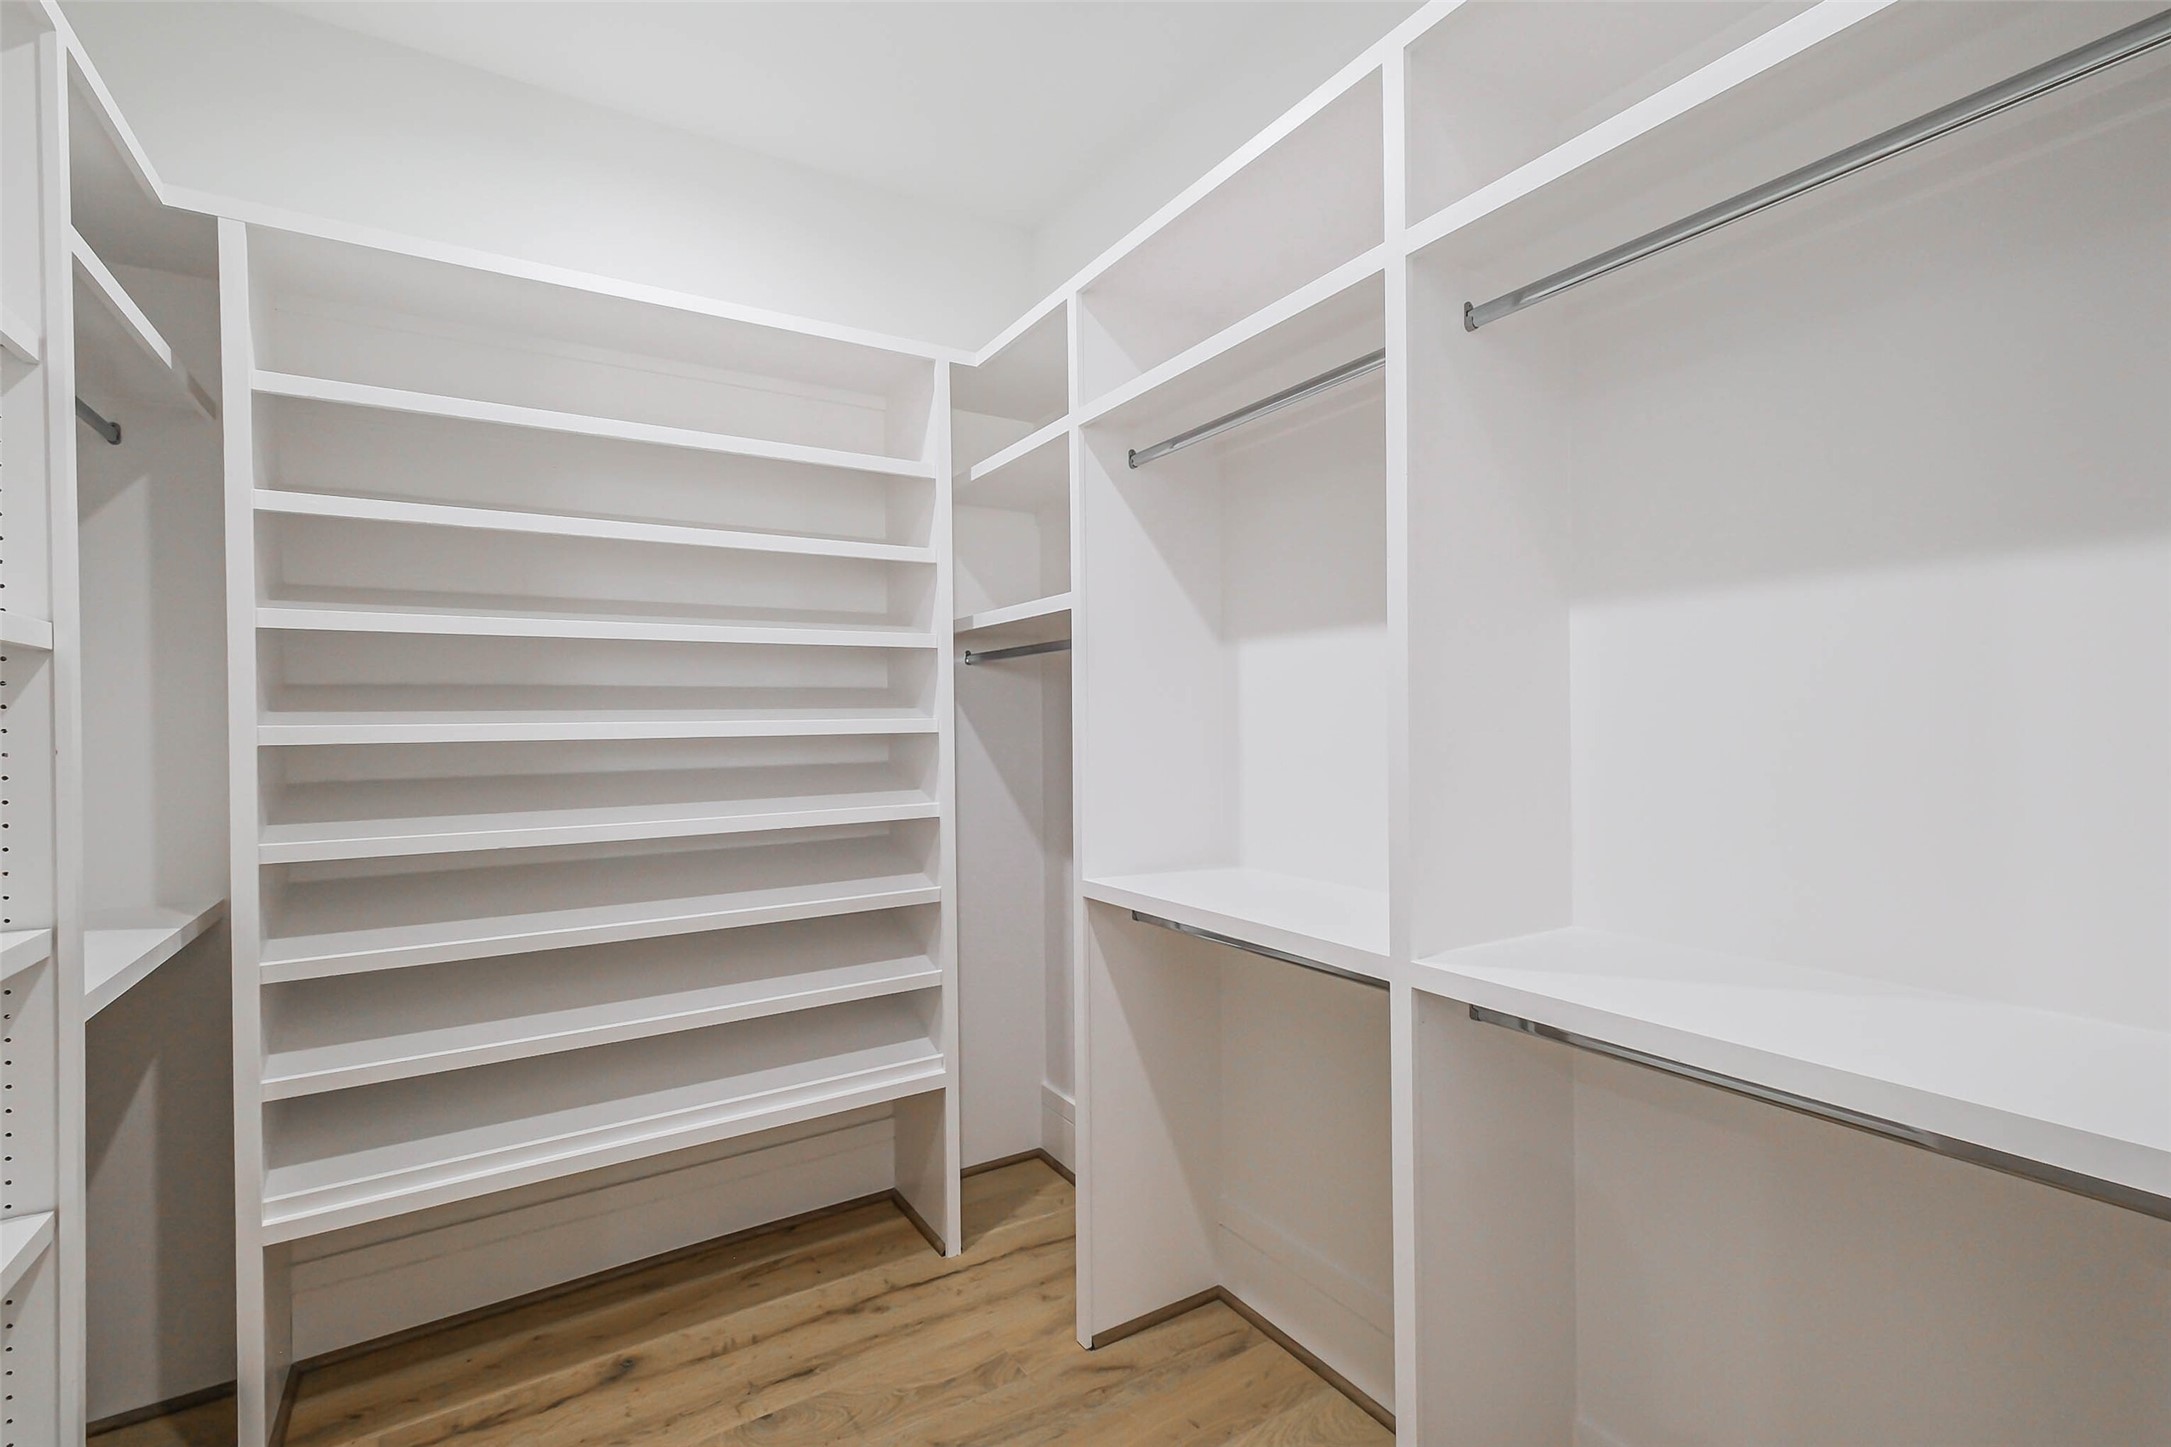 2nd Closet in Primary Suite, also features built-ins throughout.